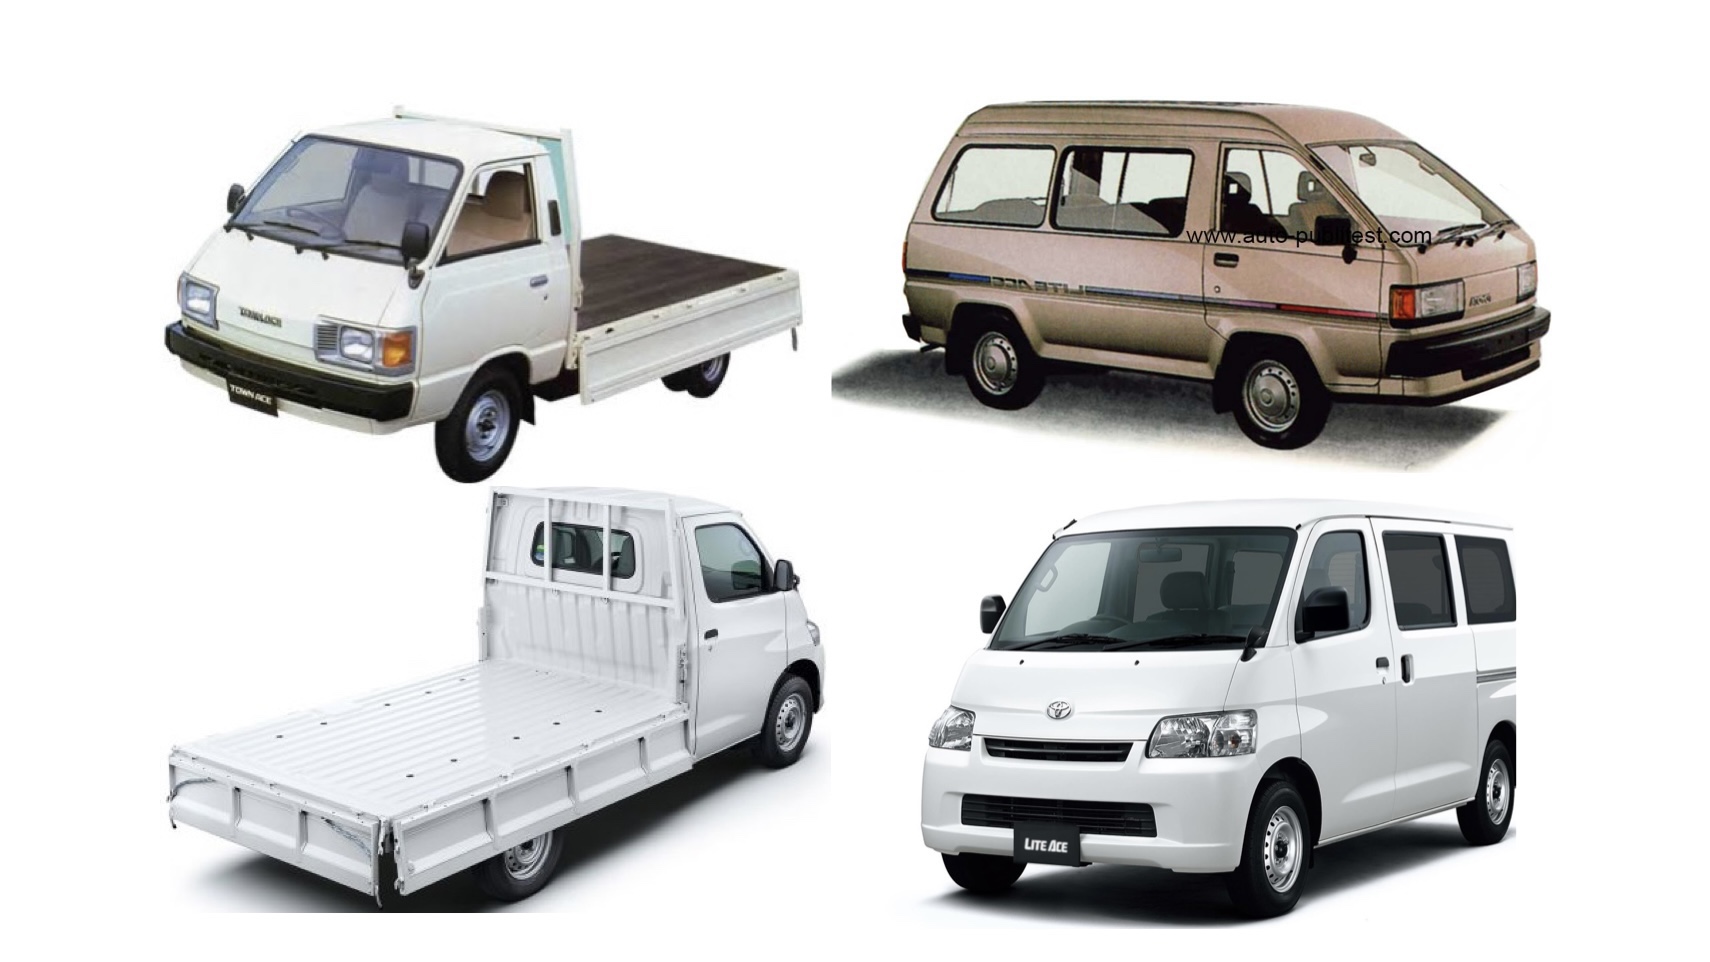 Toyota Lite Ace: Then and Now